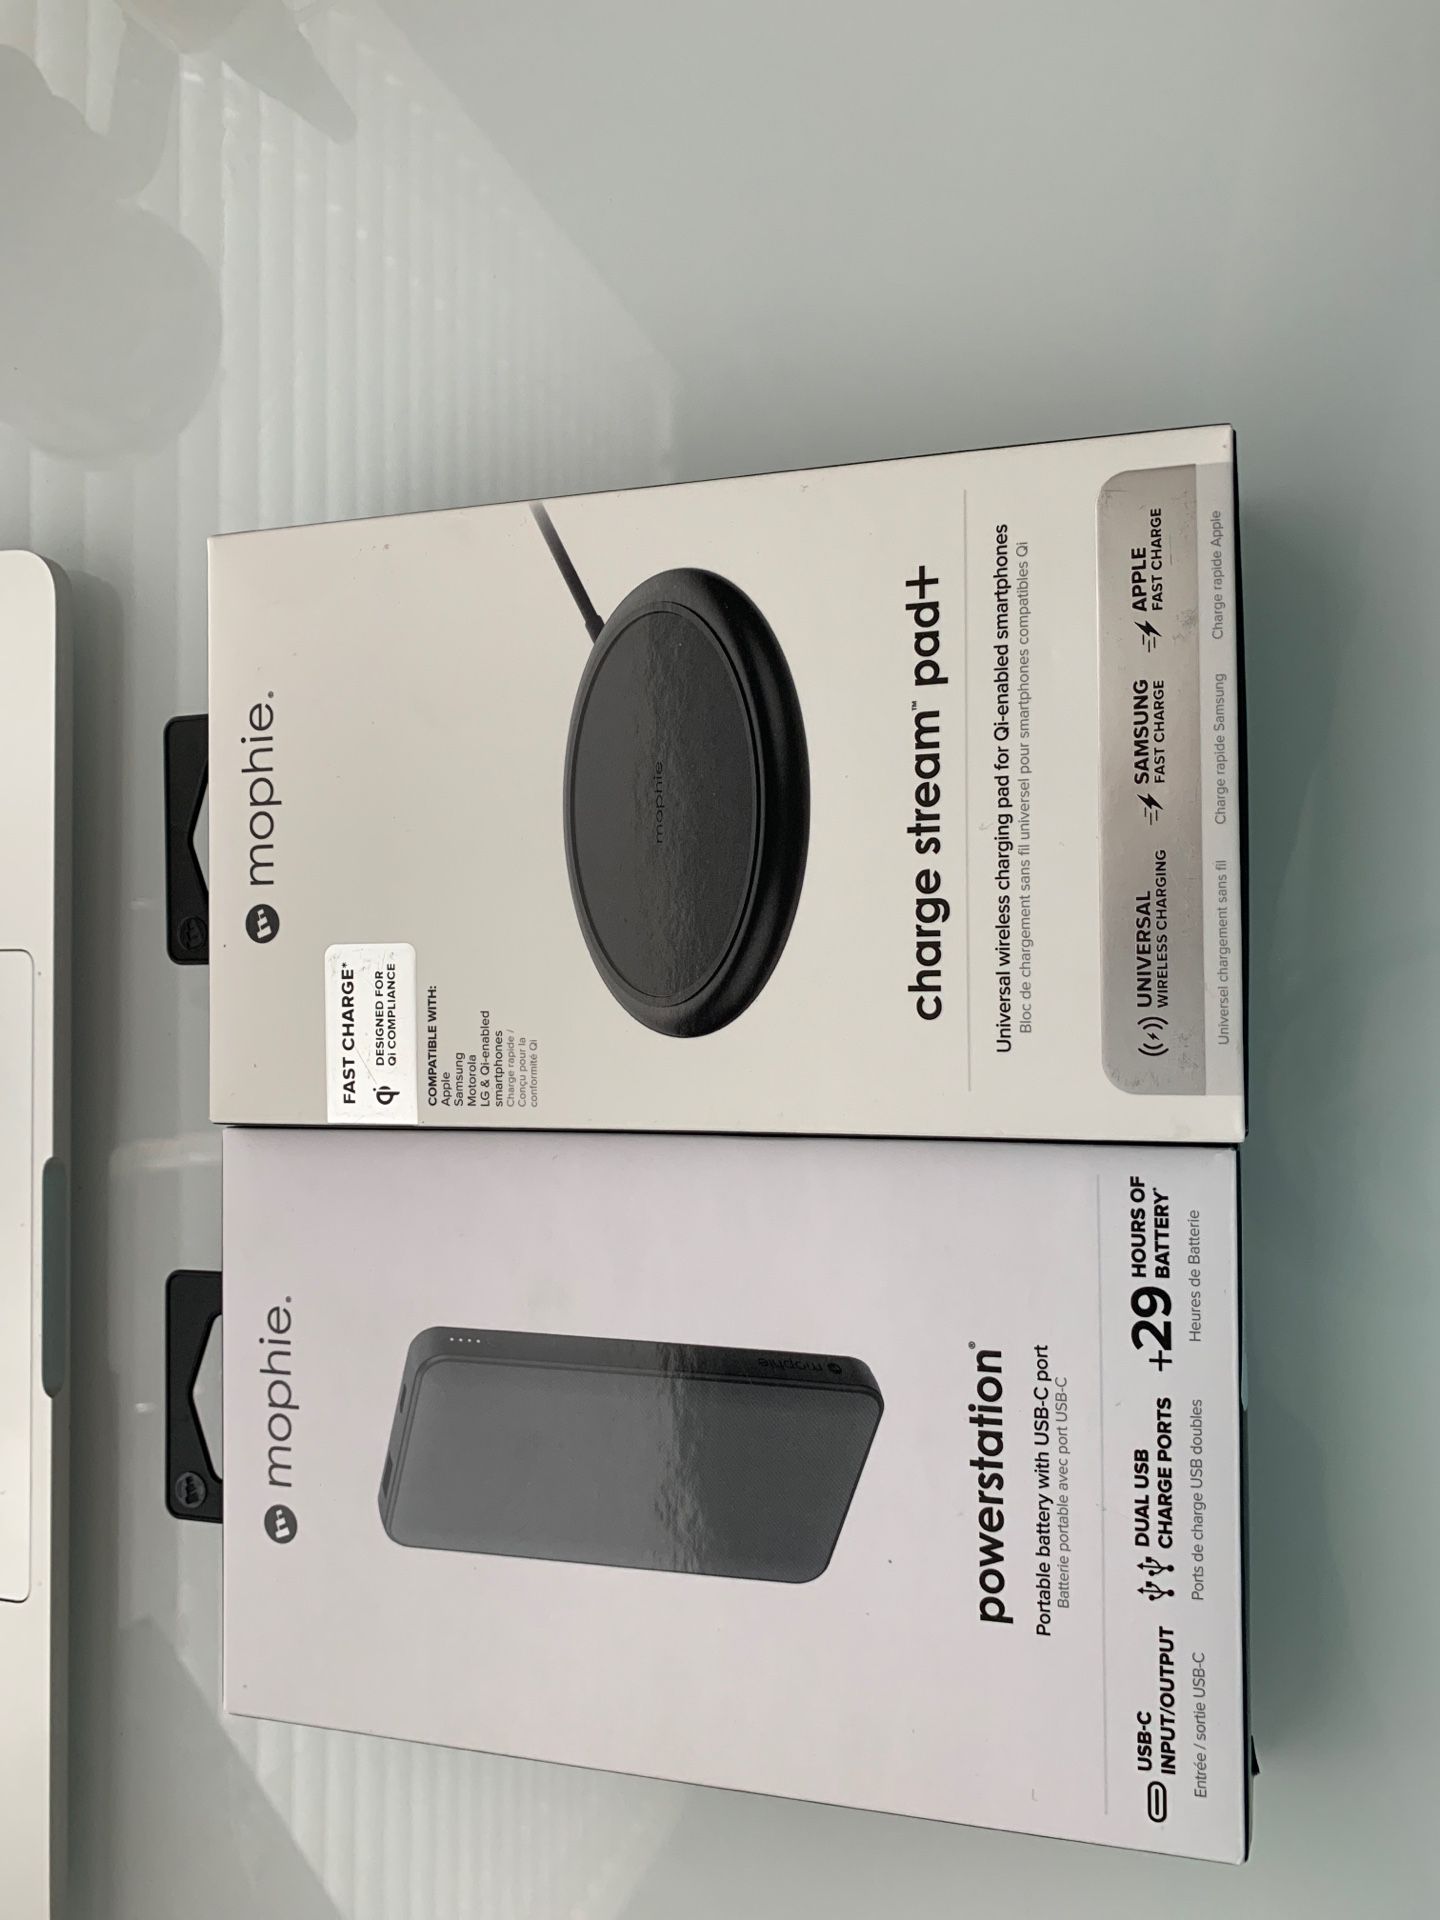 Mophie NEW charging pad